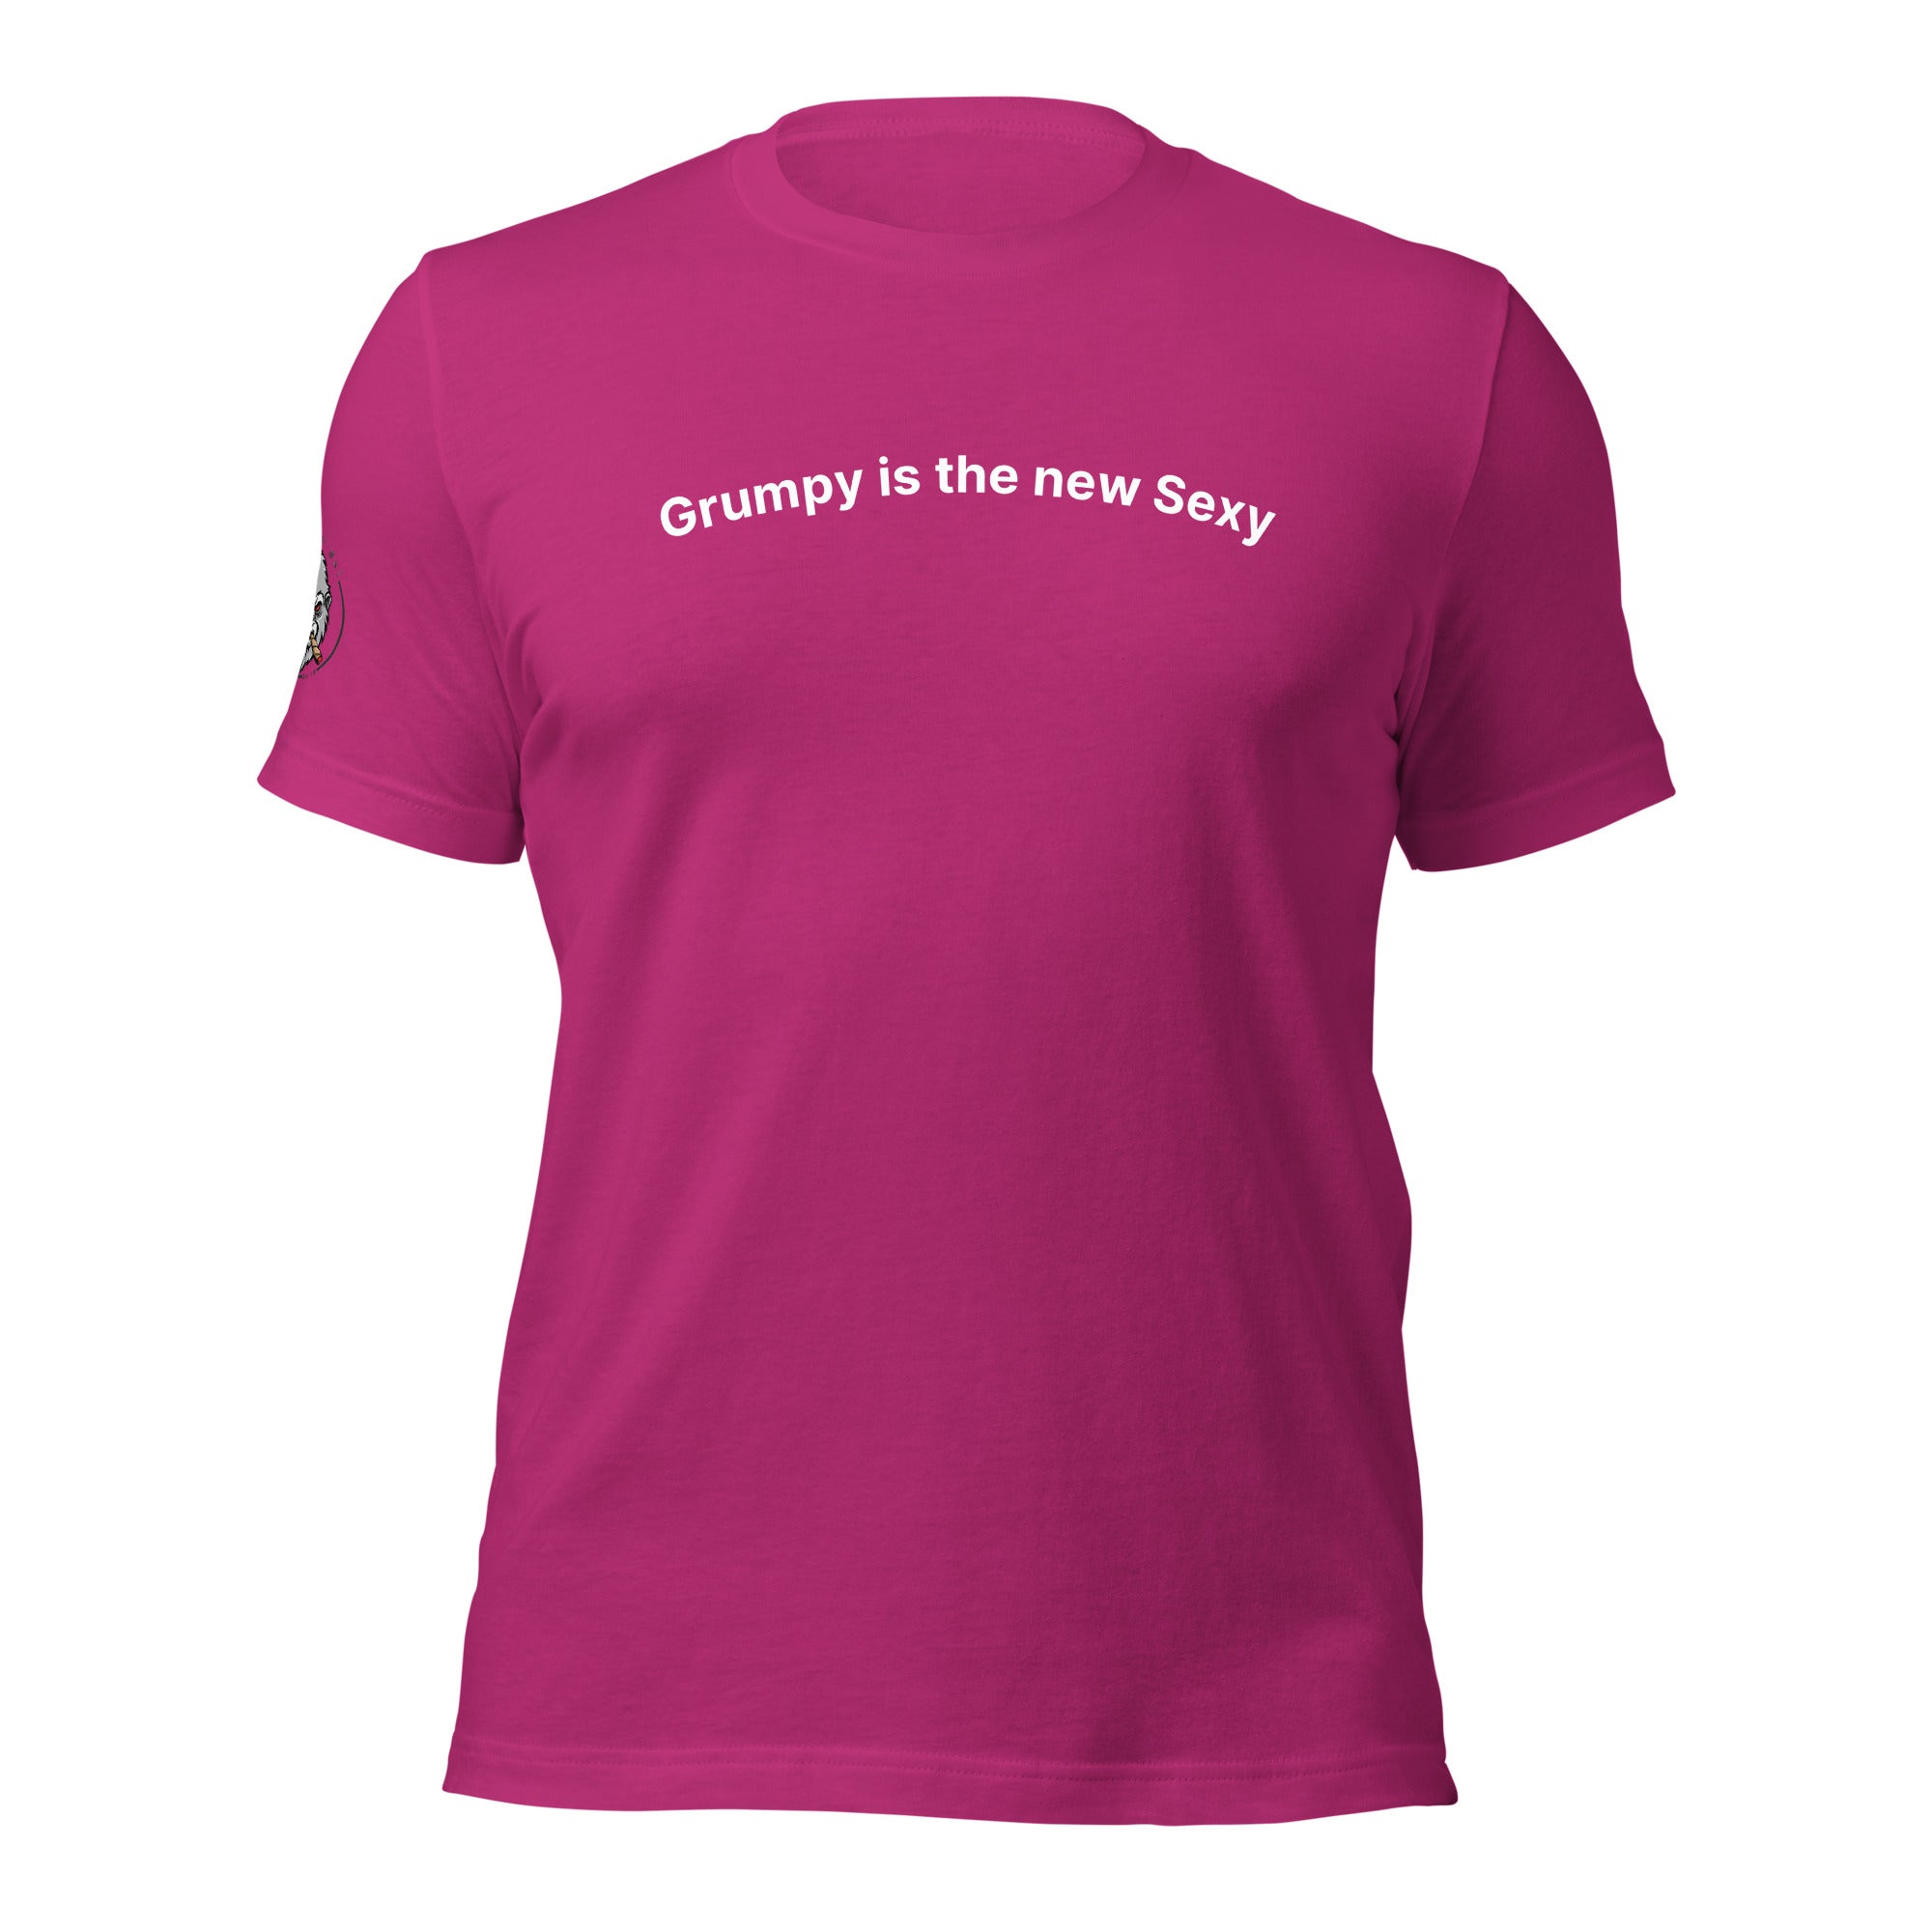 Grumpy is the New Sexy Unisex T-shirt